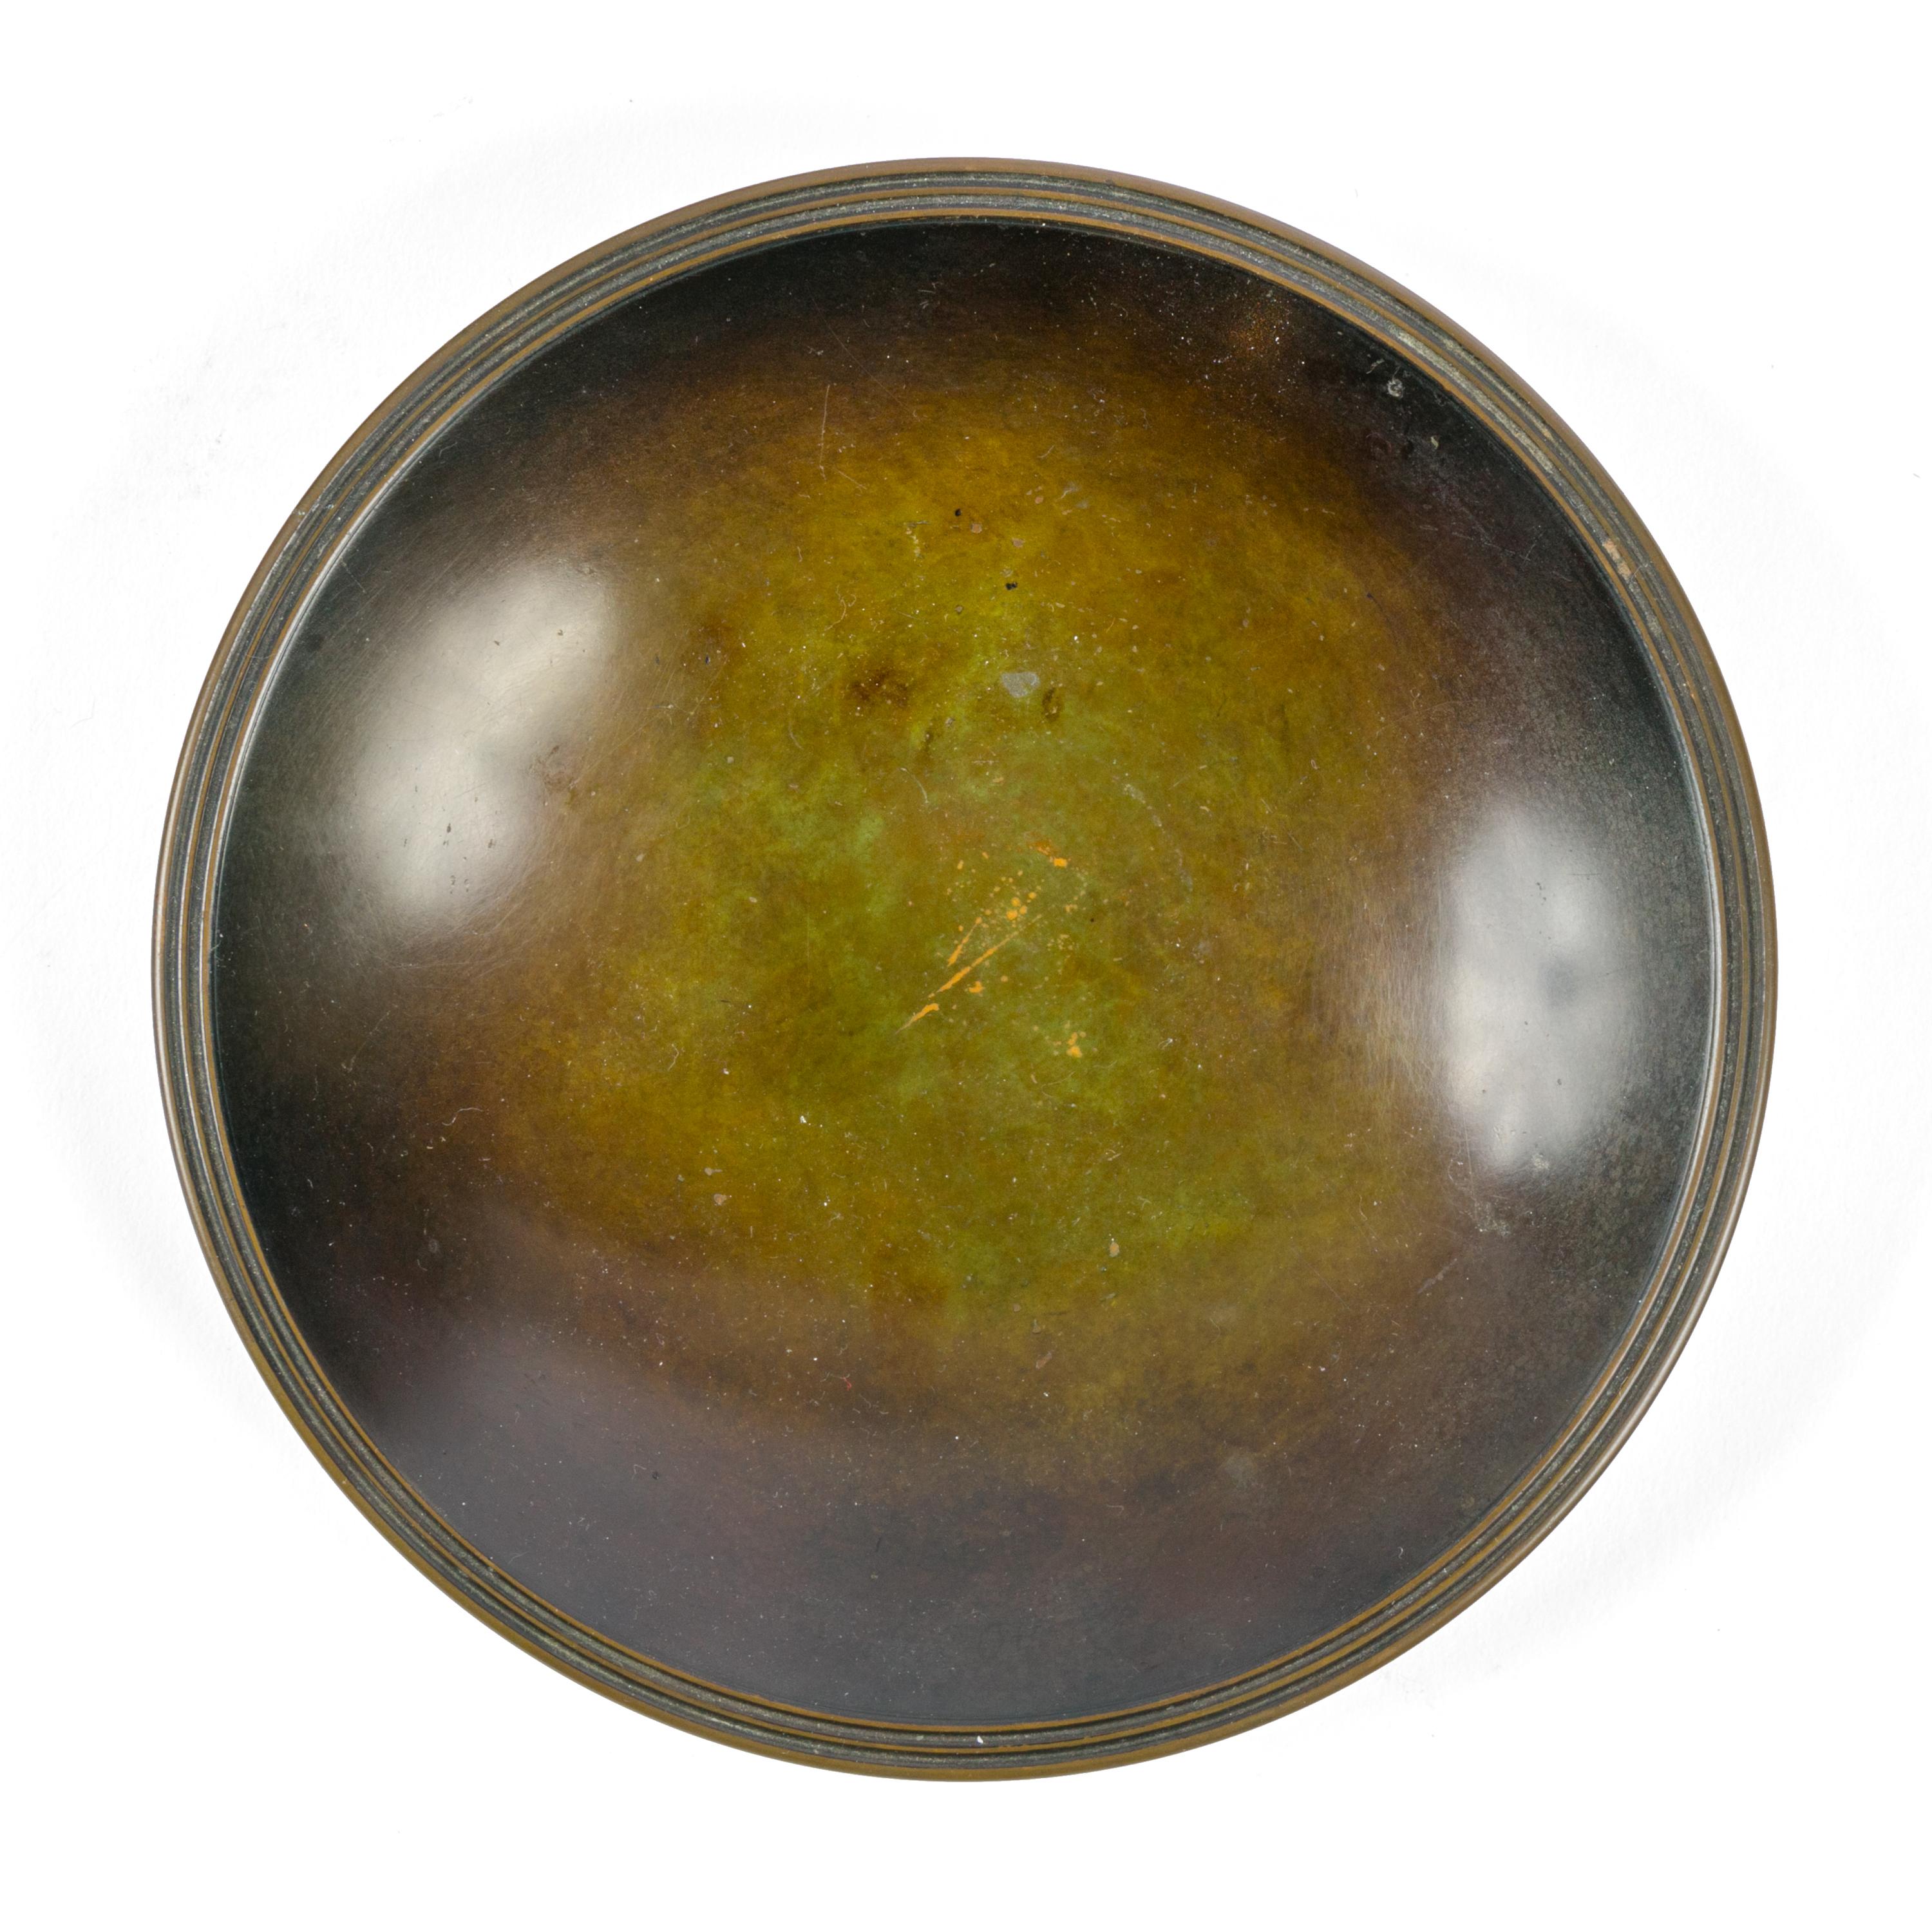 Scandinavian Modern Just Anderson Signed Patinated Bronze Dish or Bowl, Denmark, 1930s